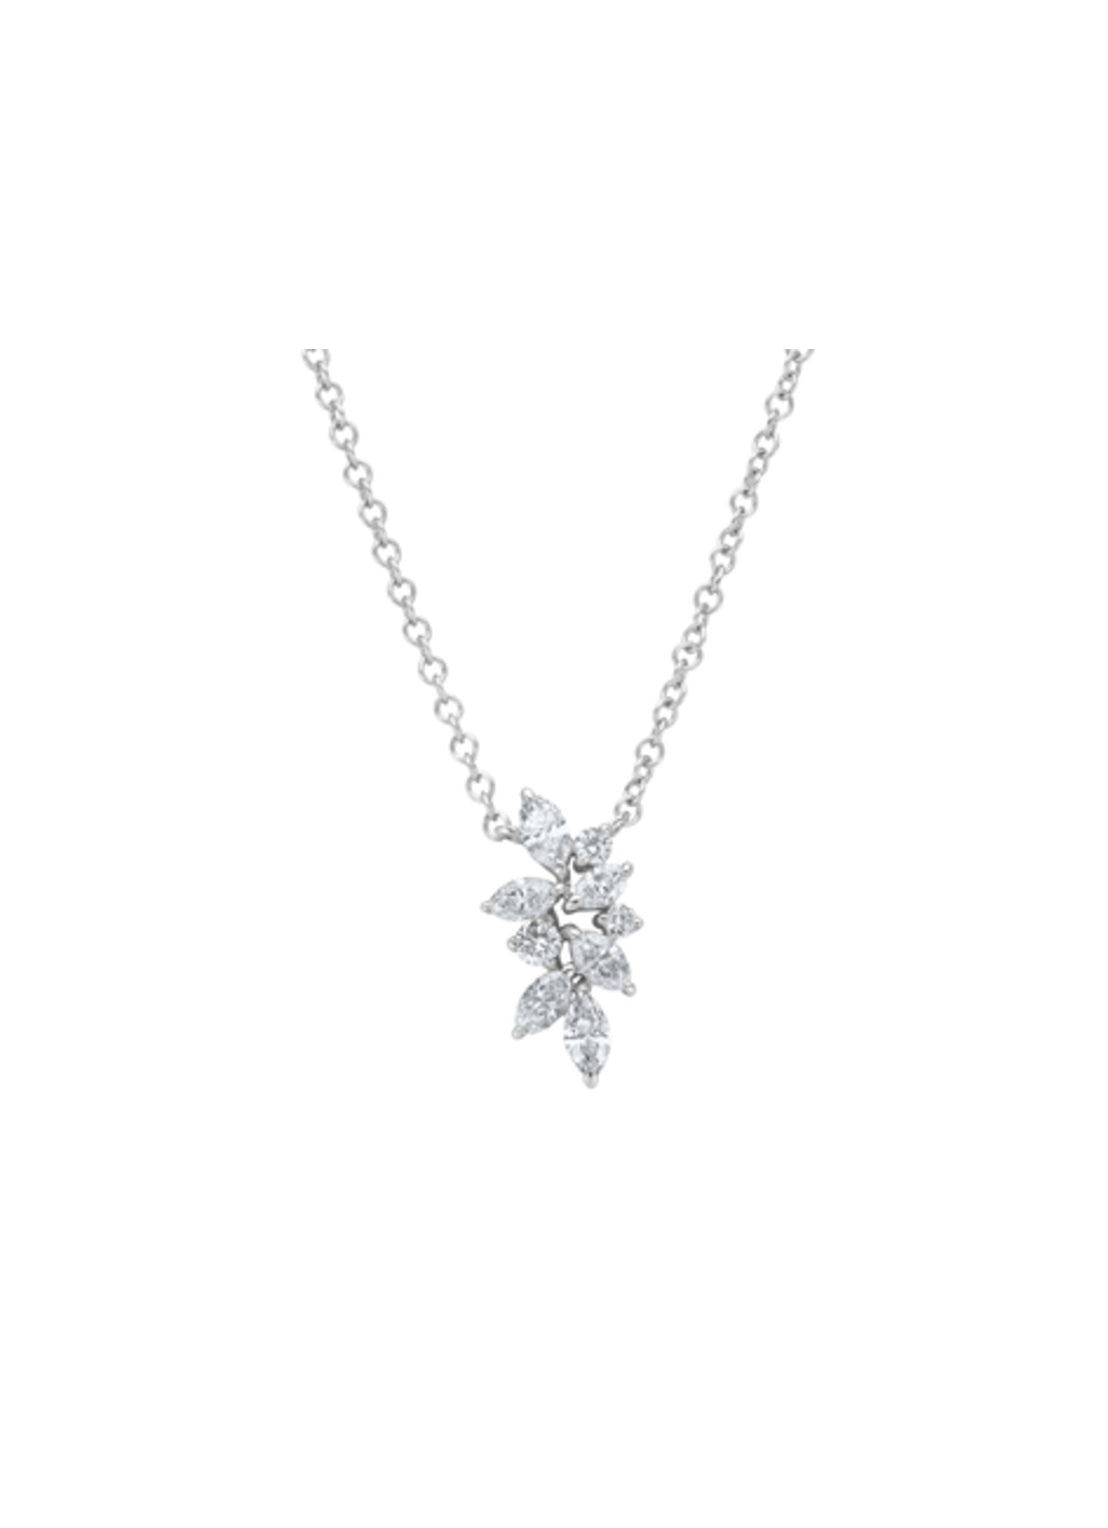 White gold necklace, 0.49 CT Diamond, Gallery